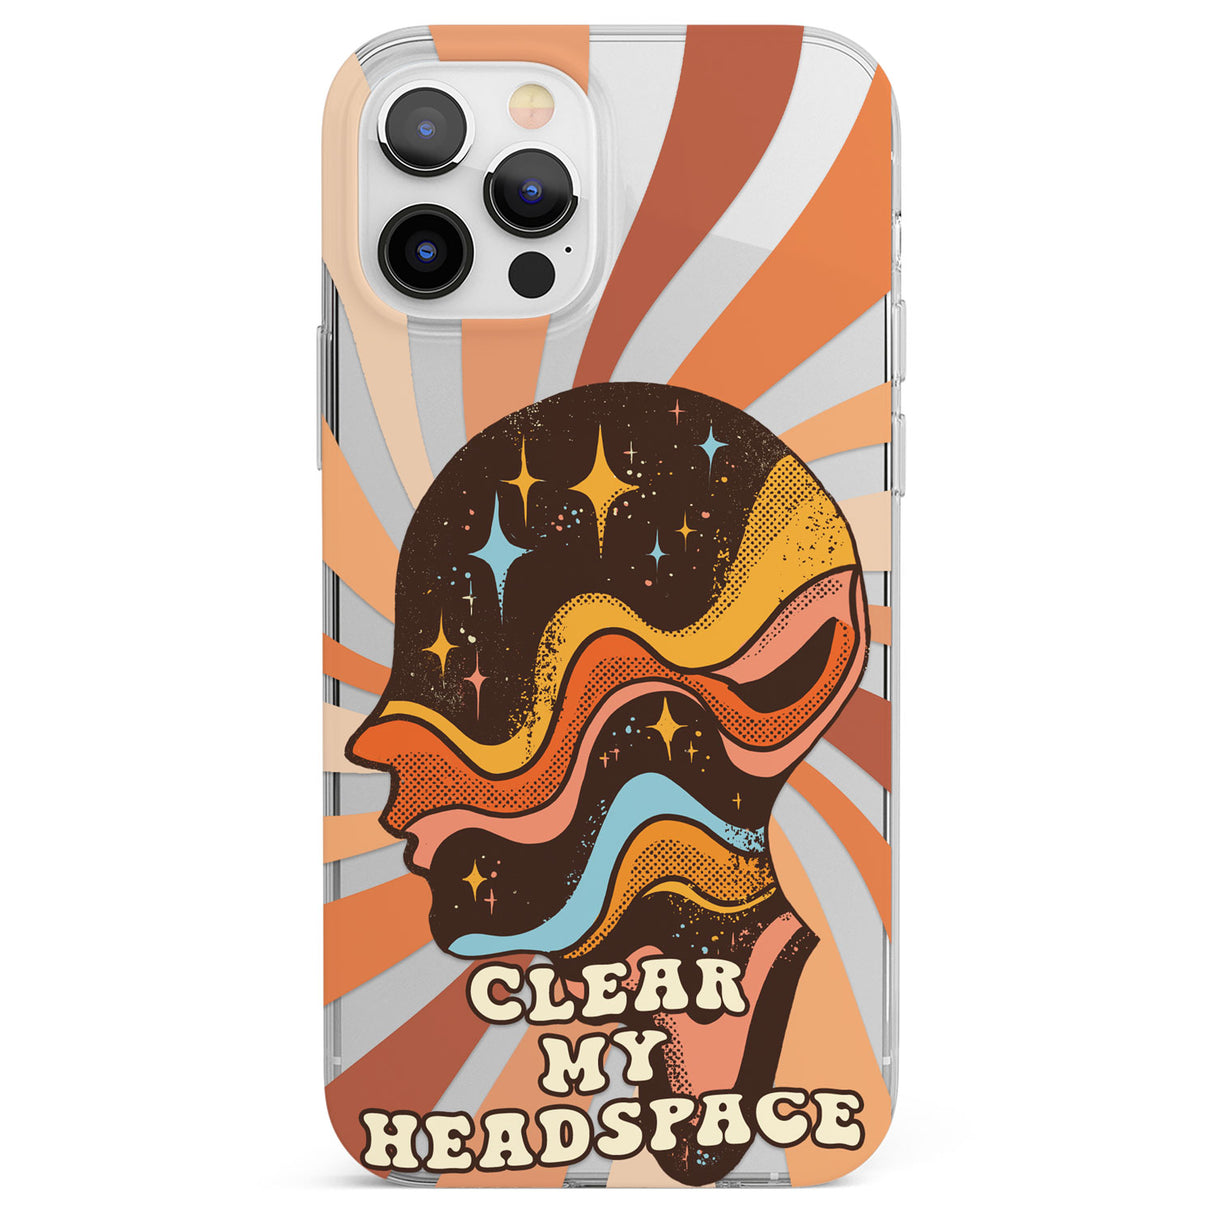 Clear My Headspace Phone Case for iPhone 12 Pro